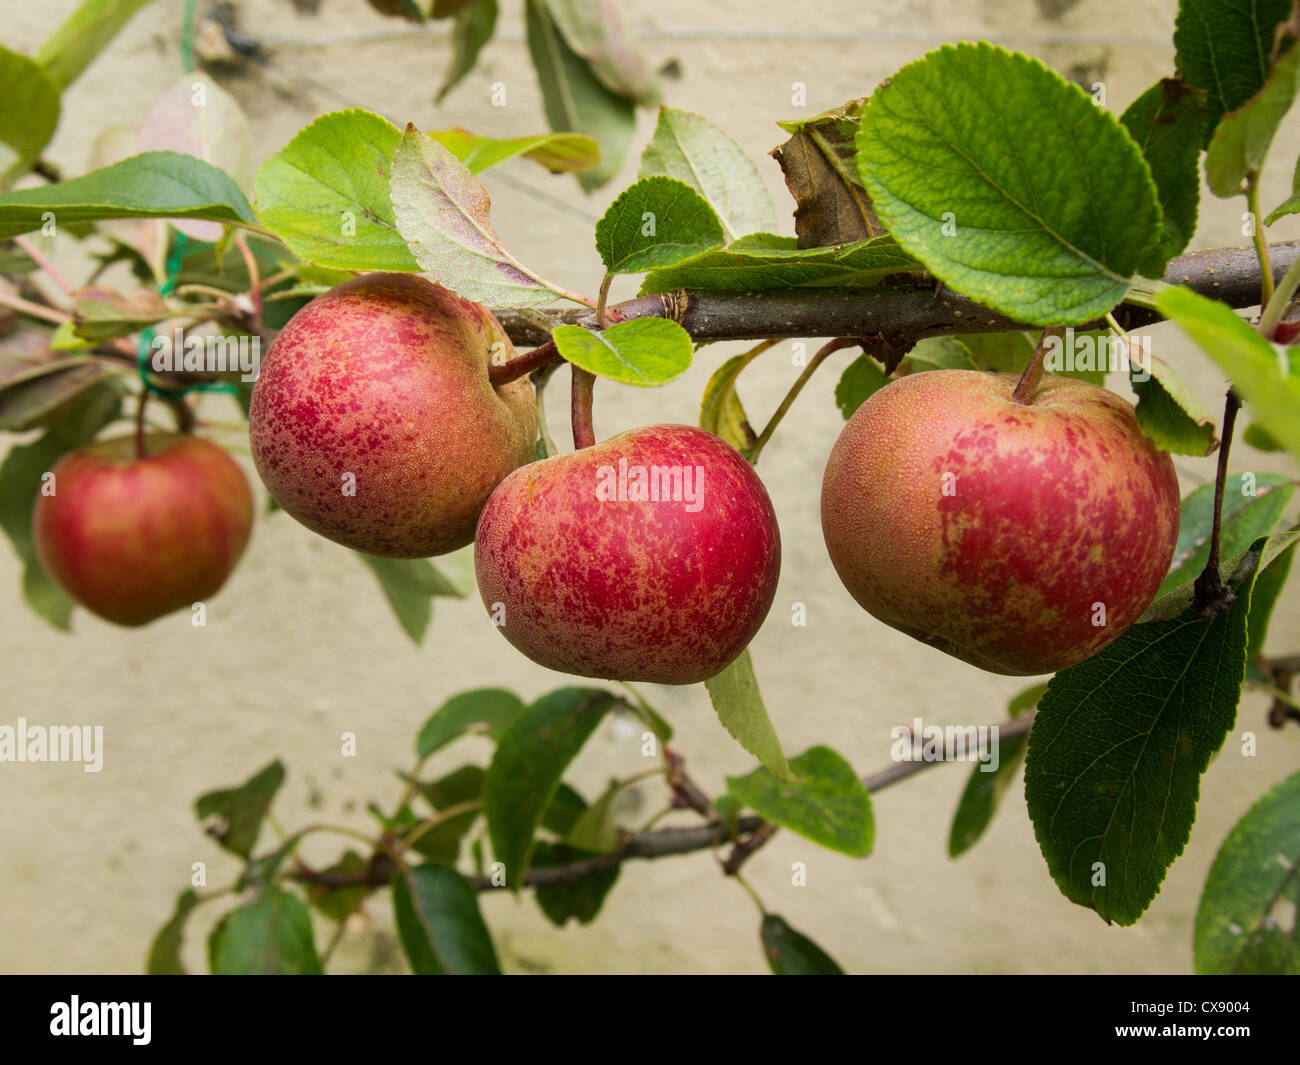 Four red ripe eating apples hanging from a branch in a garden Stock Photo